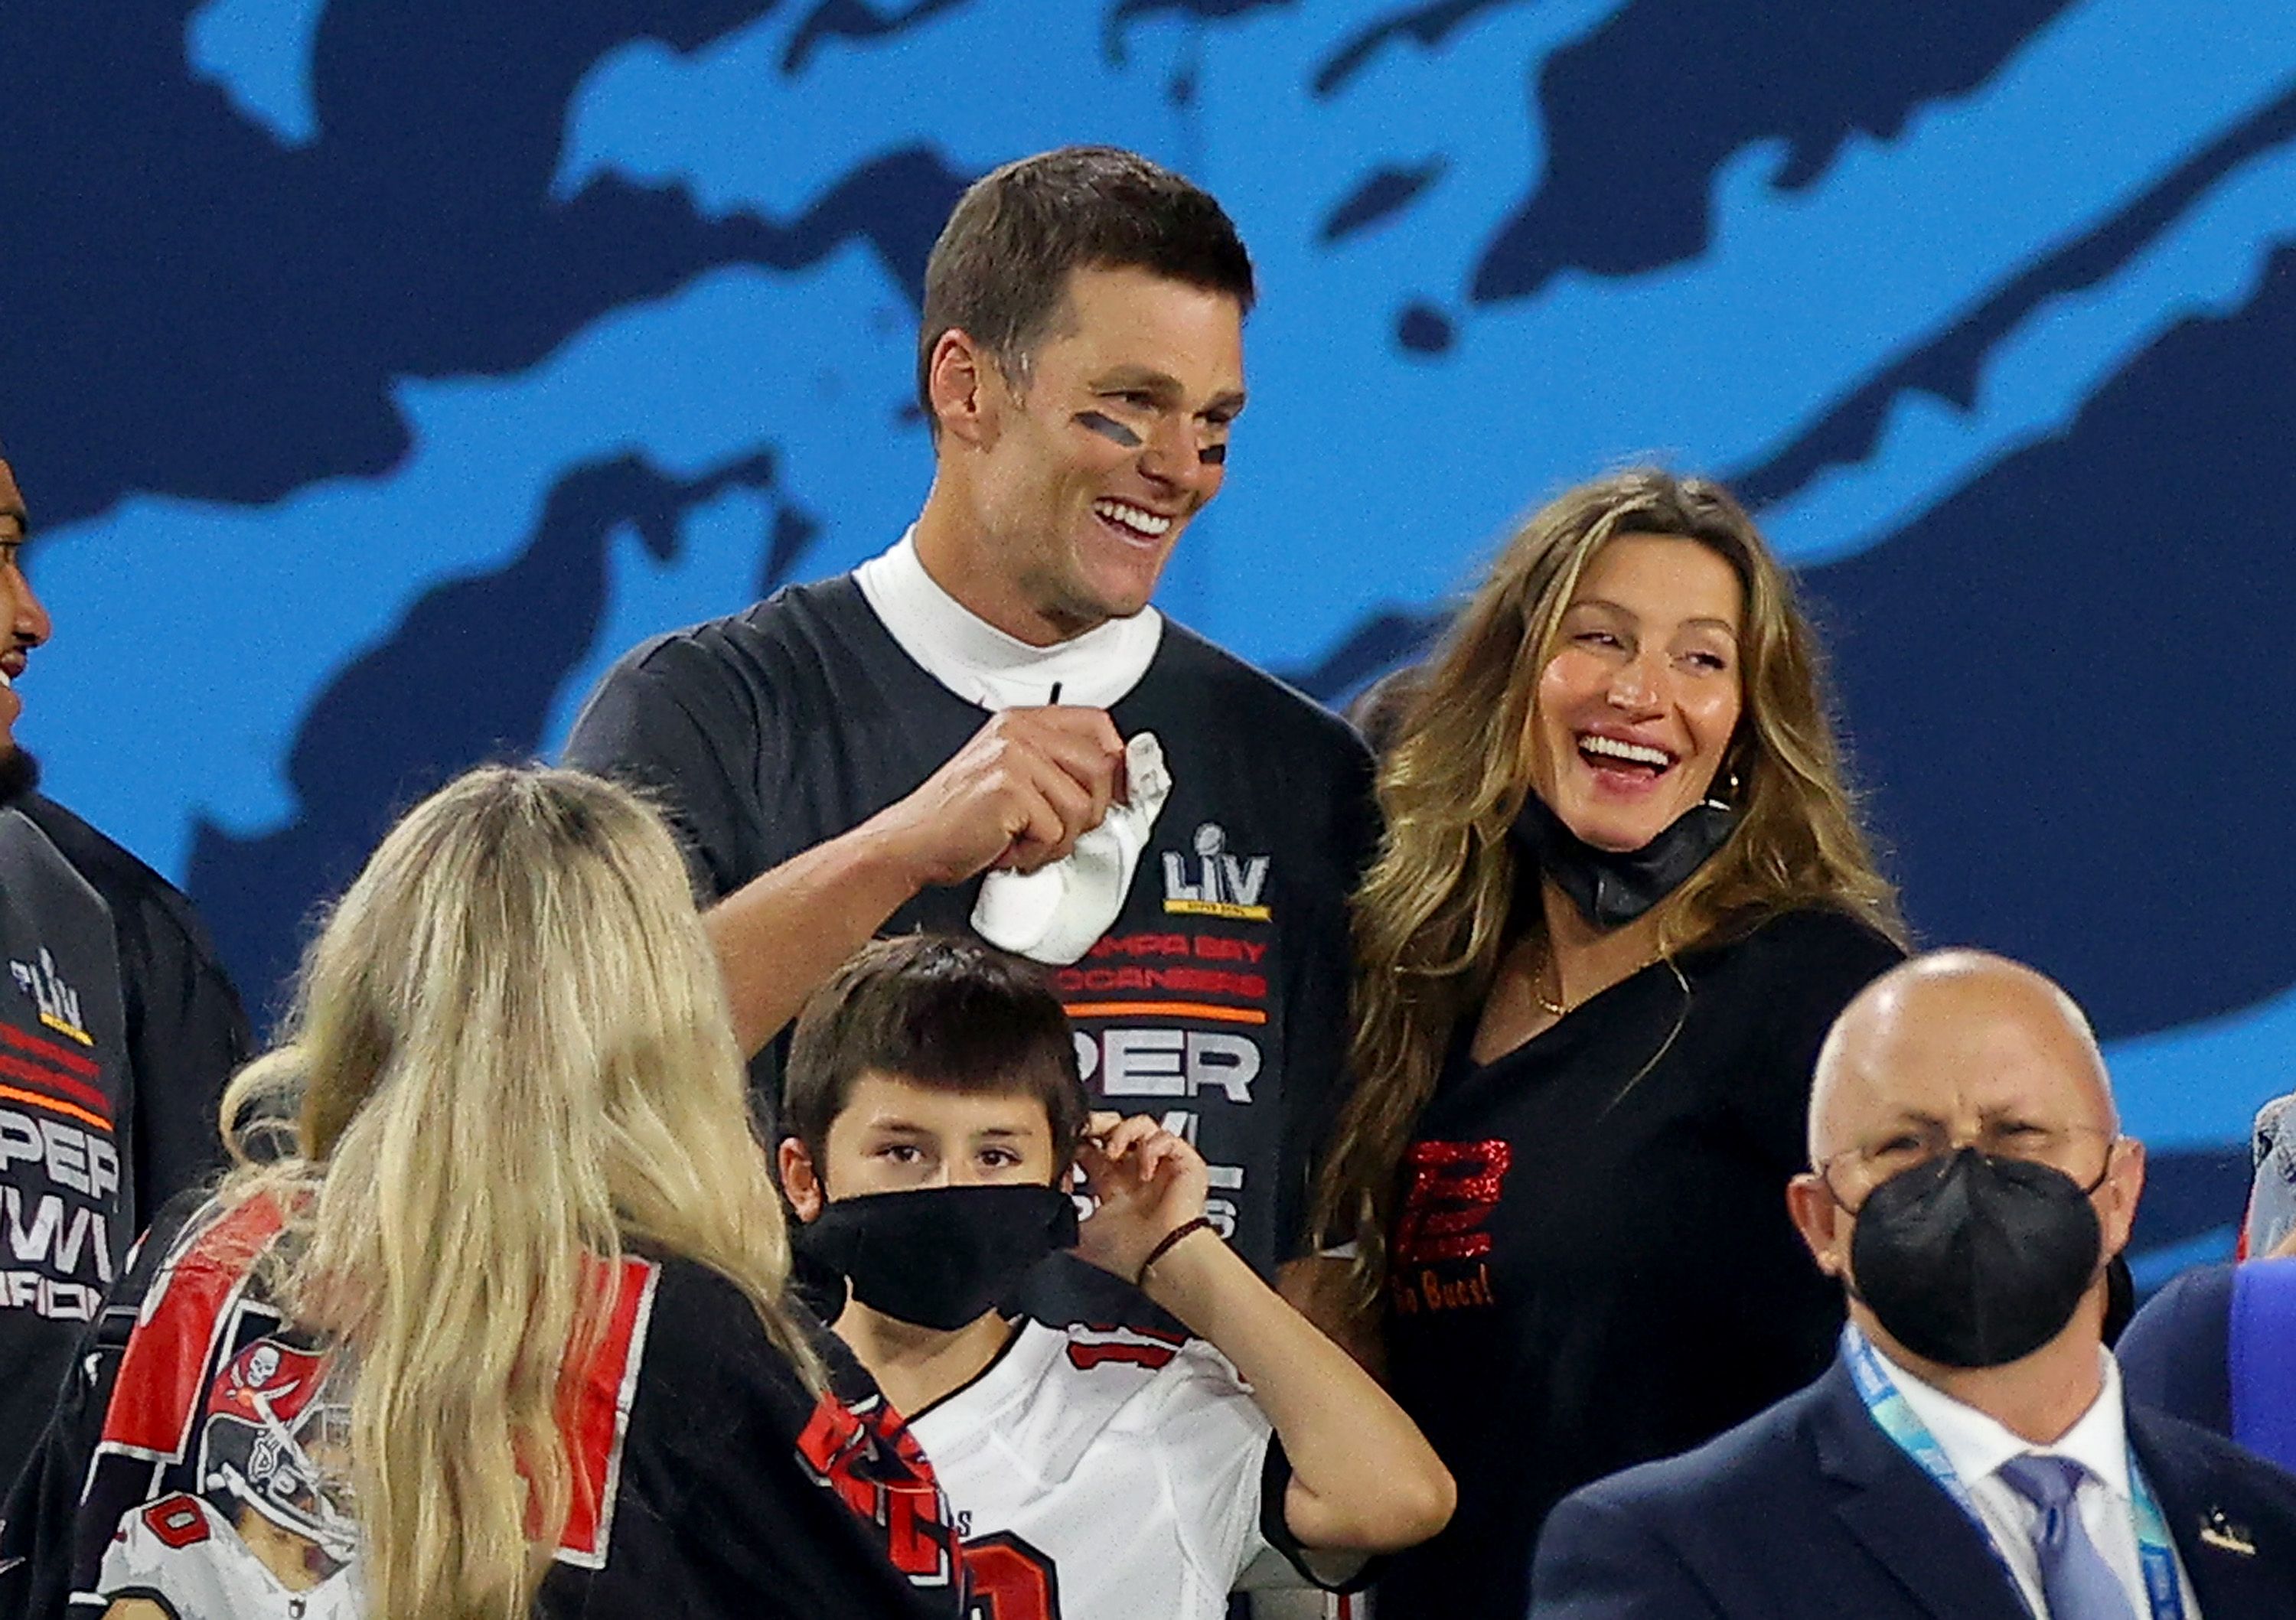 Gisele Bündchen is looking back on some special moments with Tom Brady and Bridget  Moynahan's son. ❤️ Celebrating John Jack Edward…